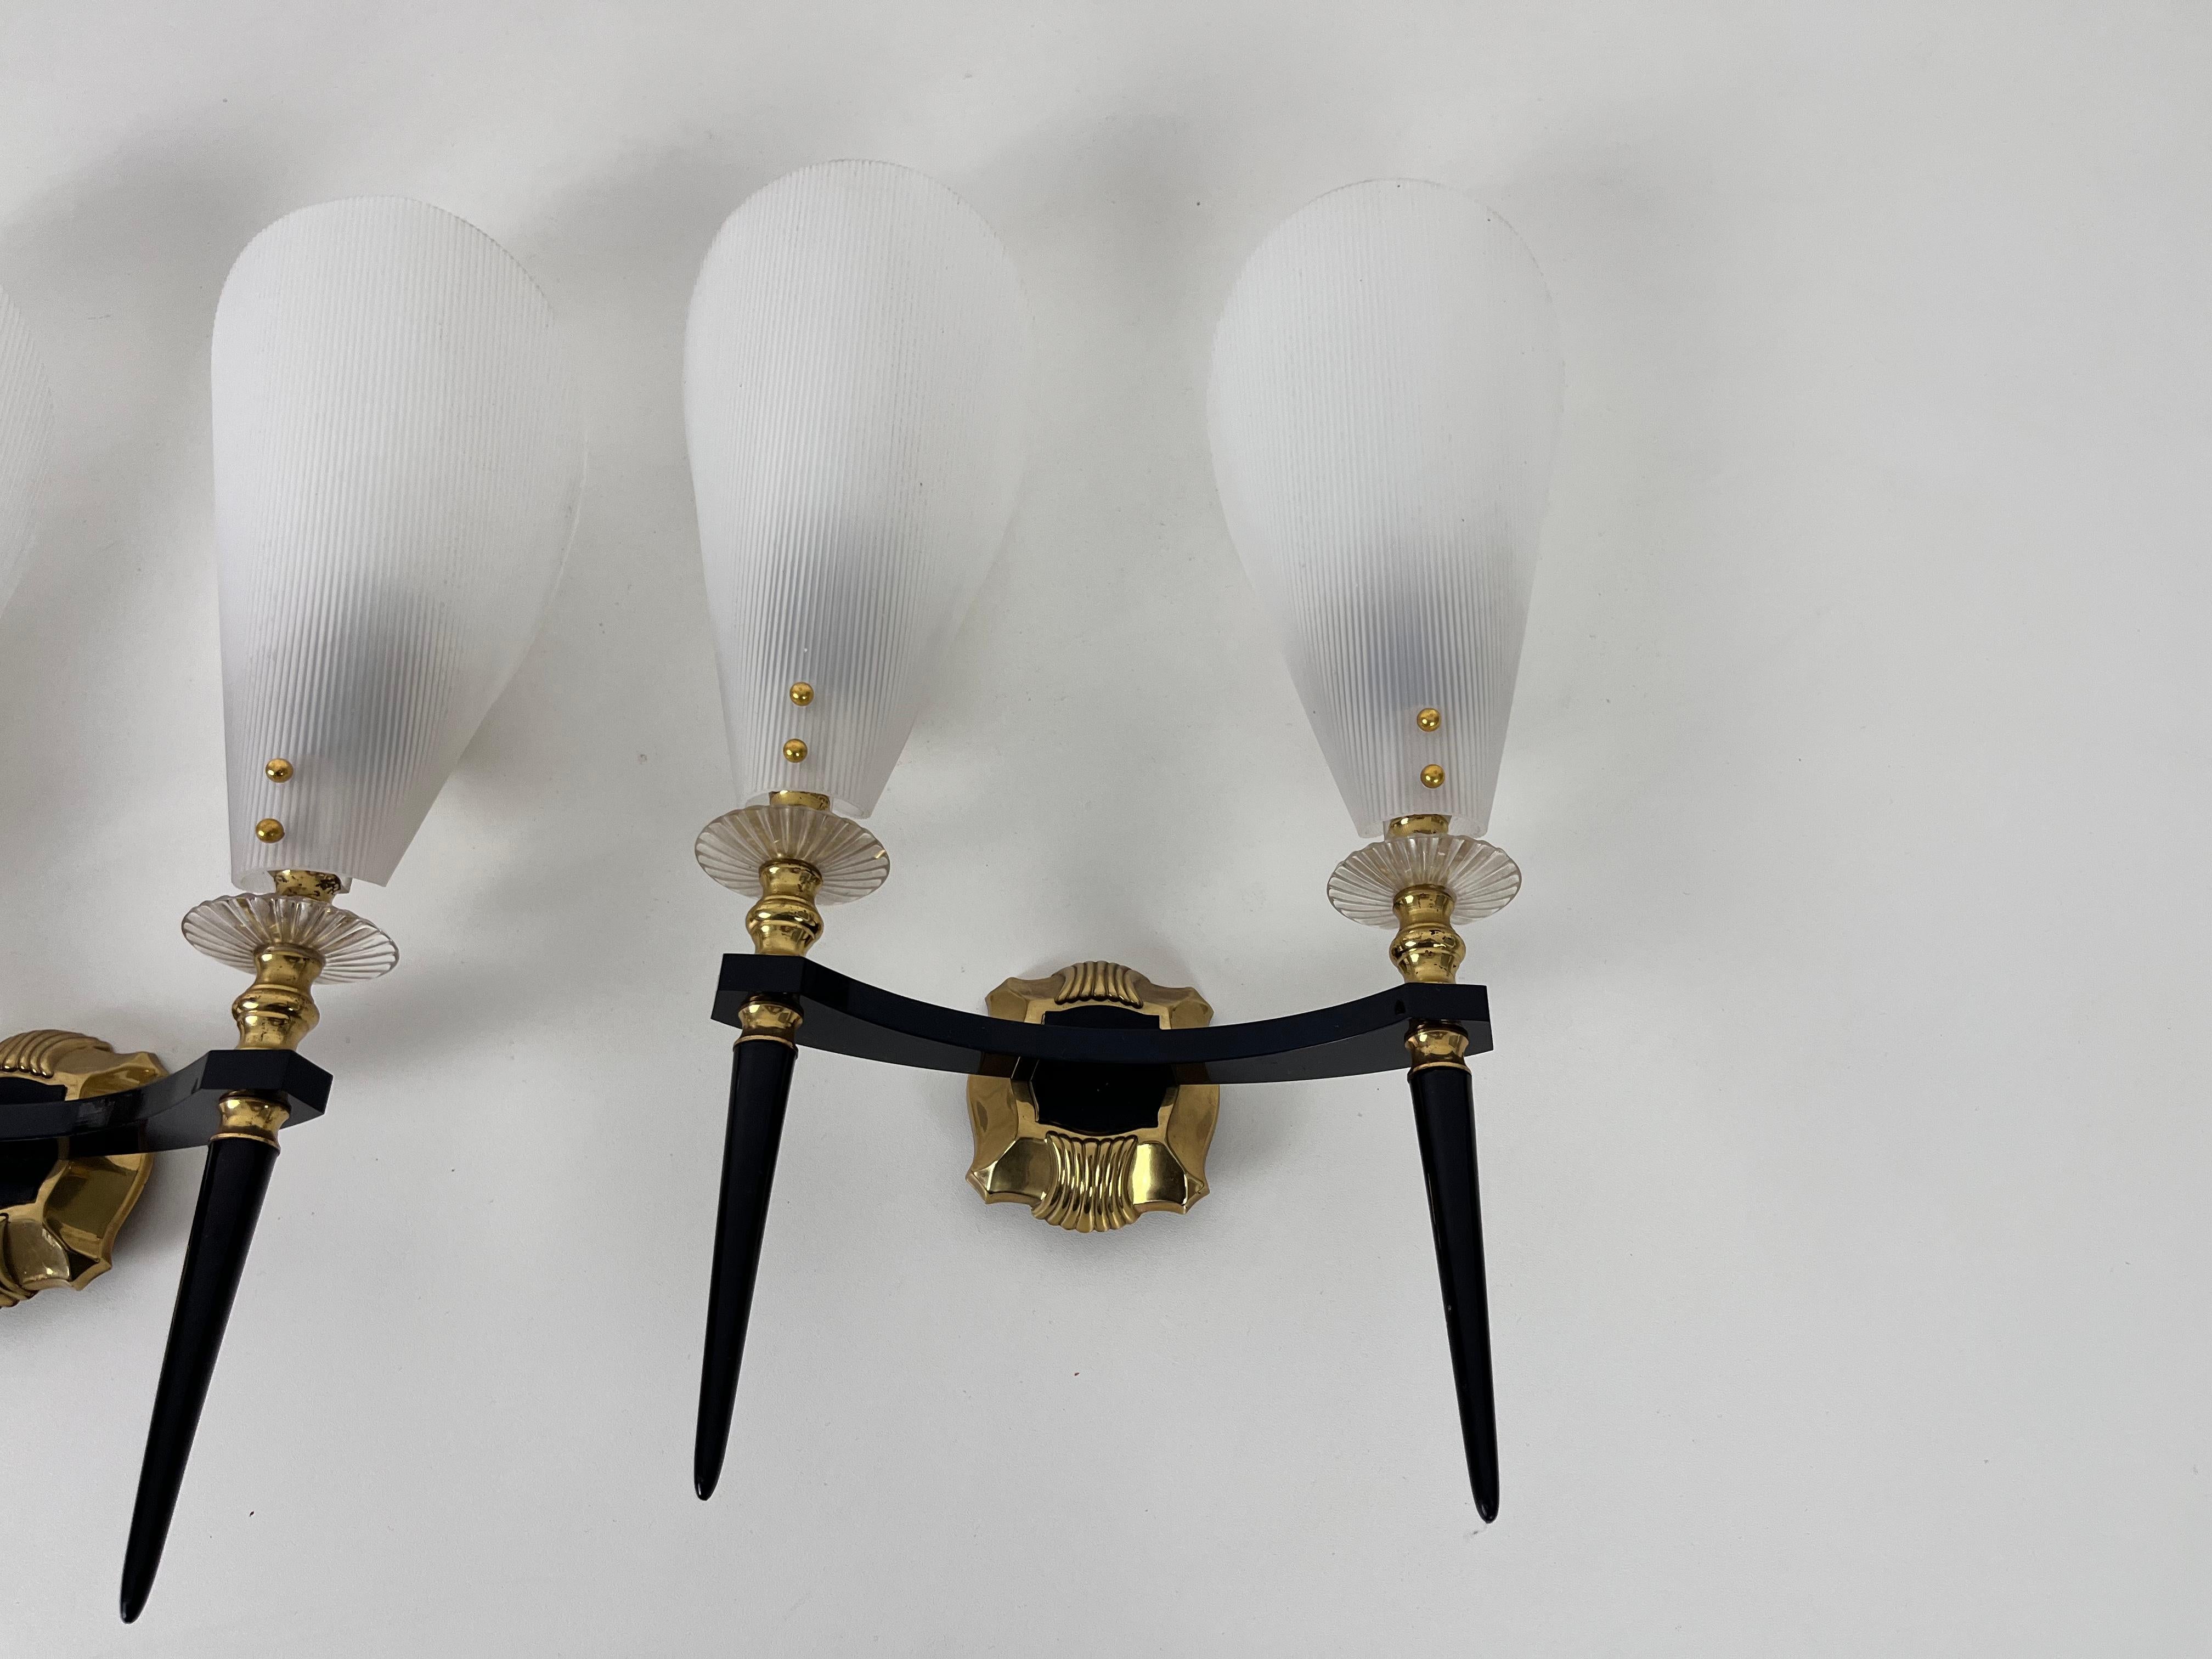 Pair of 2 Brass and Plexiglass Wall Lamps by Maison Arlus, 1960, France For Sale 7